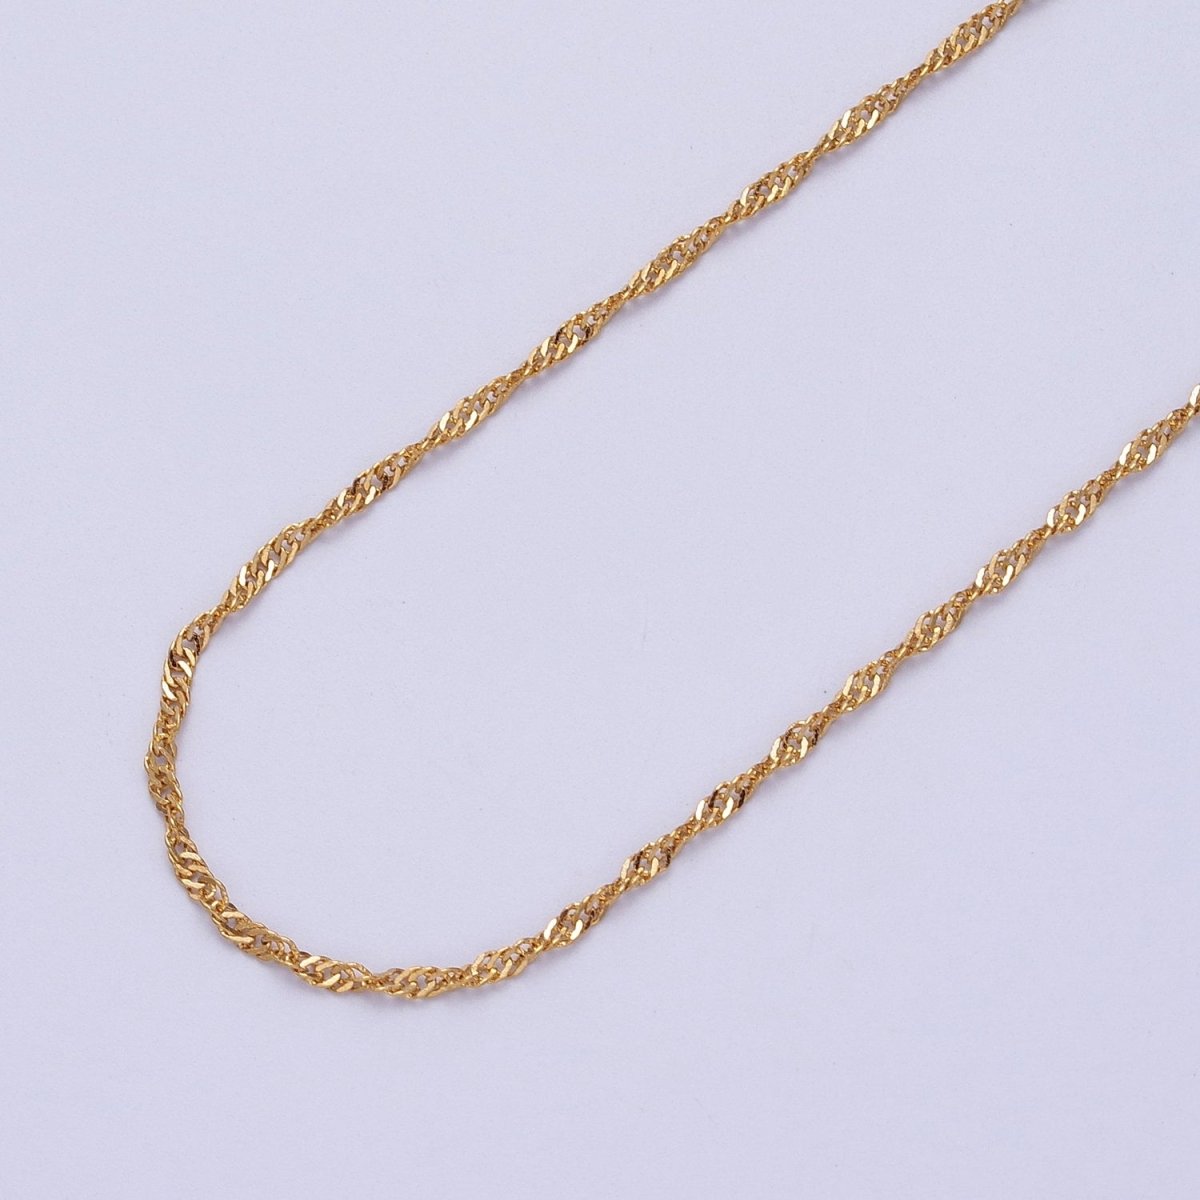 24K Gold Filled 2.5mm Width Singapore Twist Unfinished Chain in Gold & Silver | ROLL-901, ROLL-902 Clearance Pricing - DLUXCA